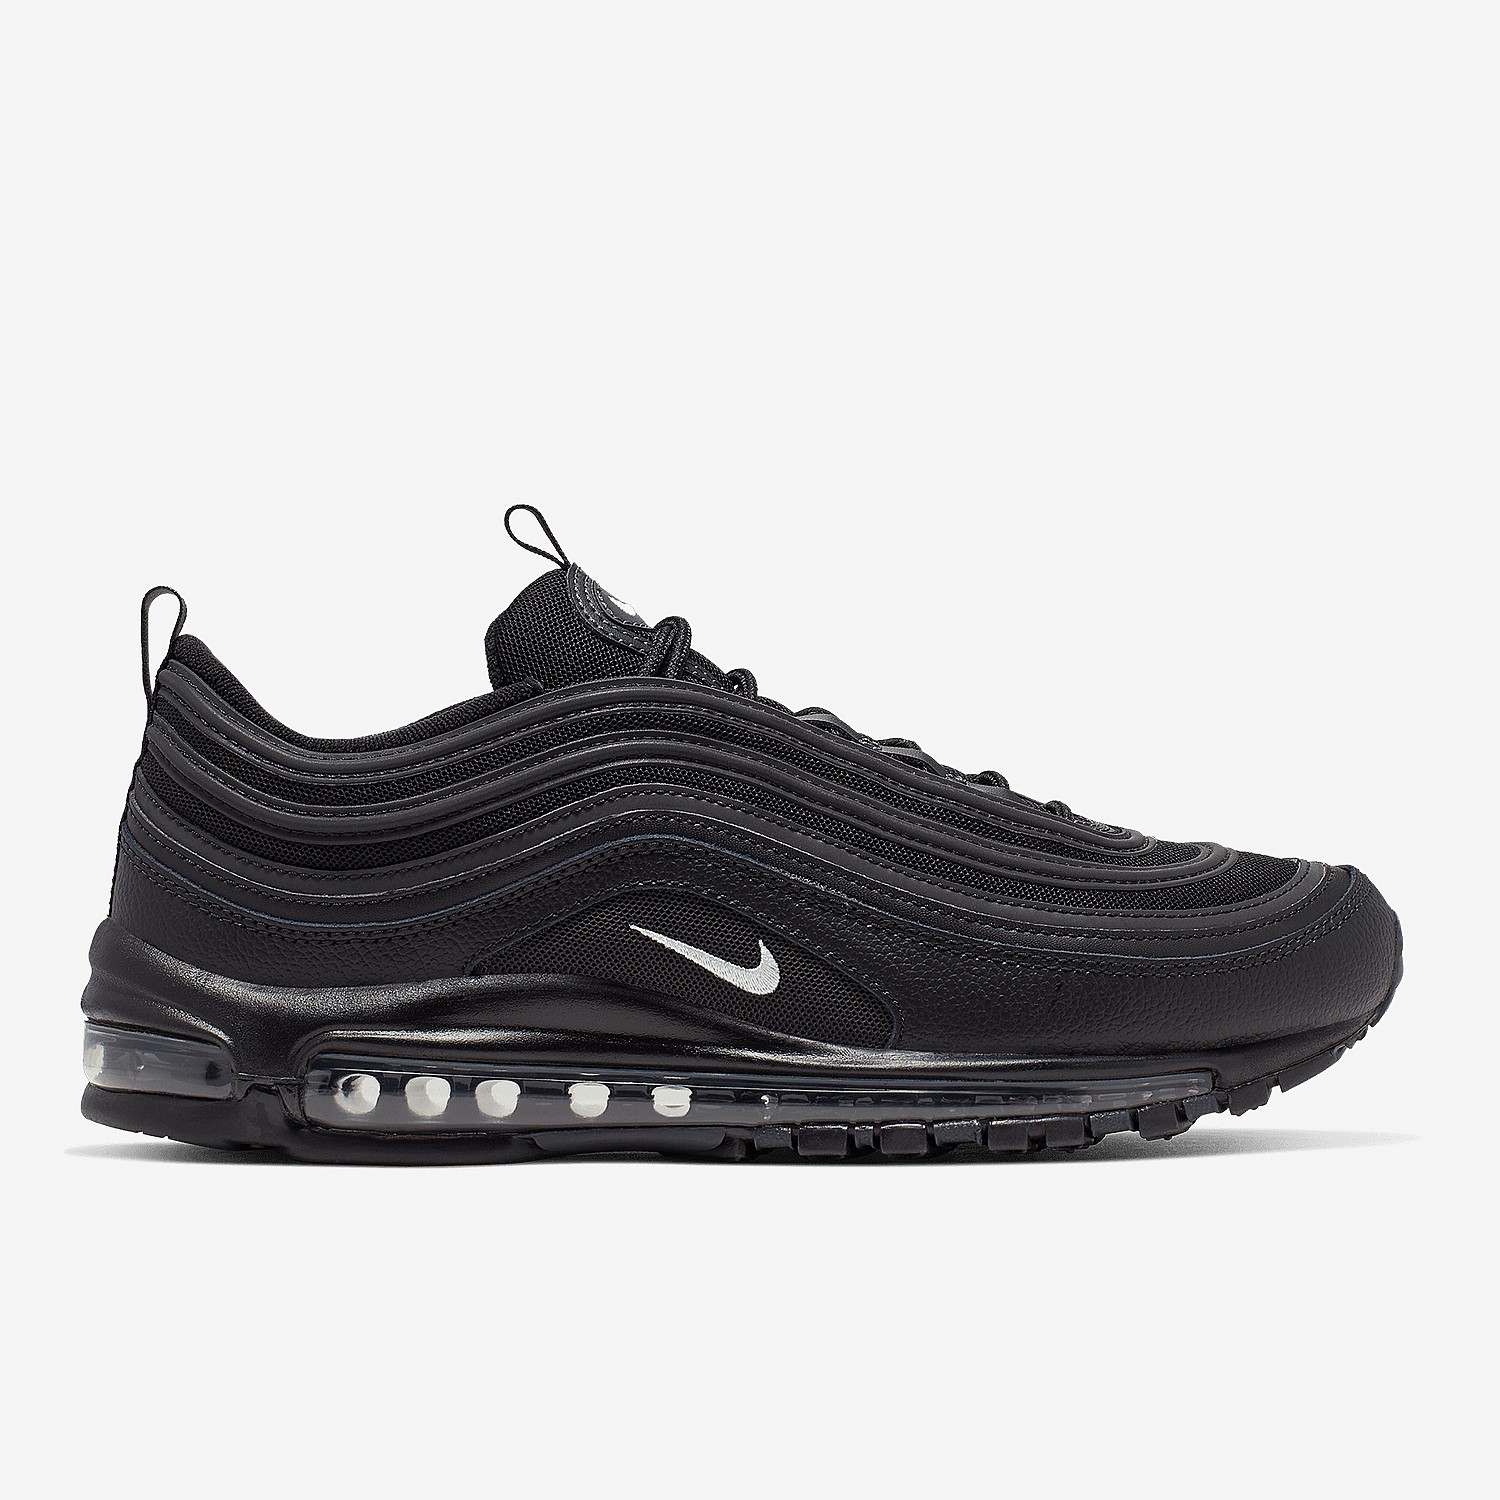 Air Max 97 Mens | Sneakers | Stirling Sports